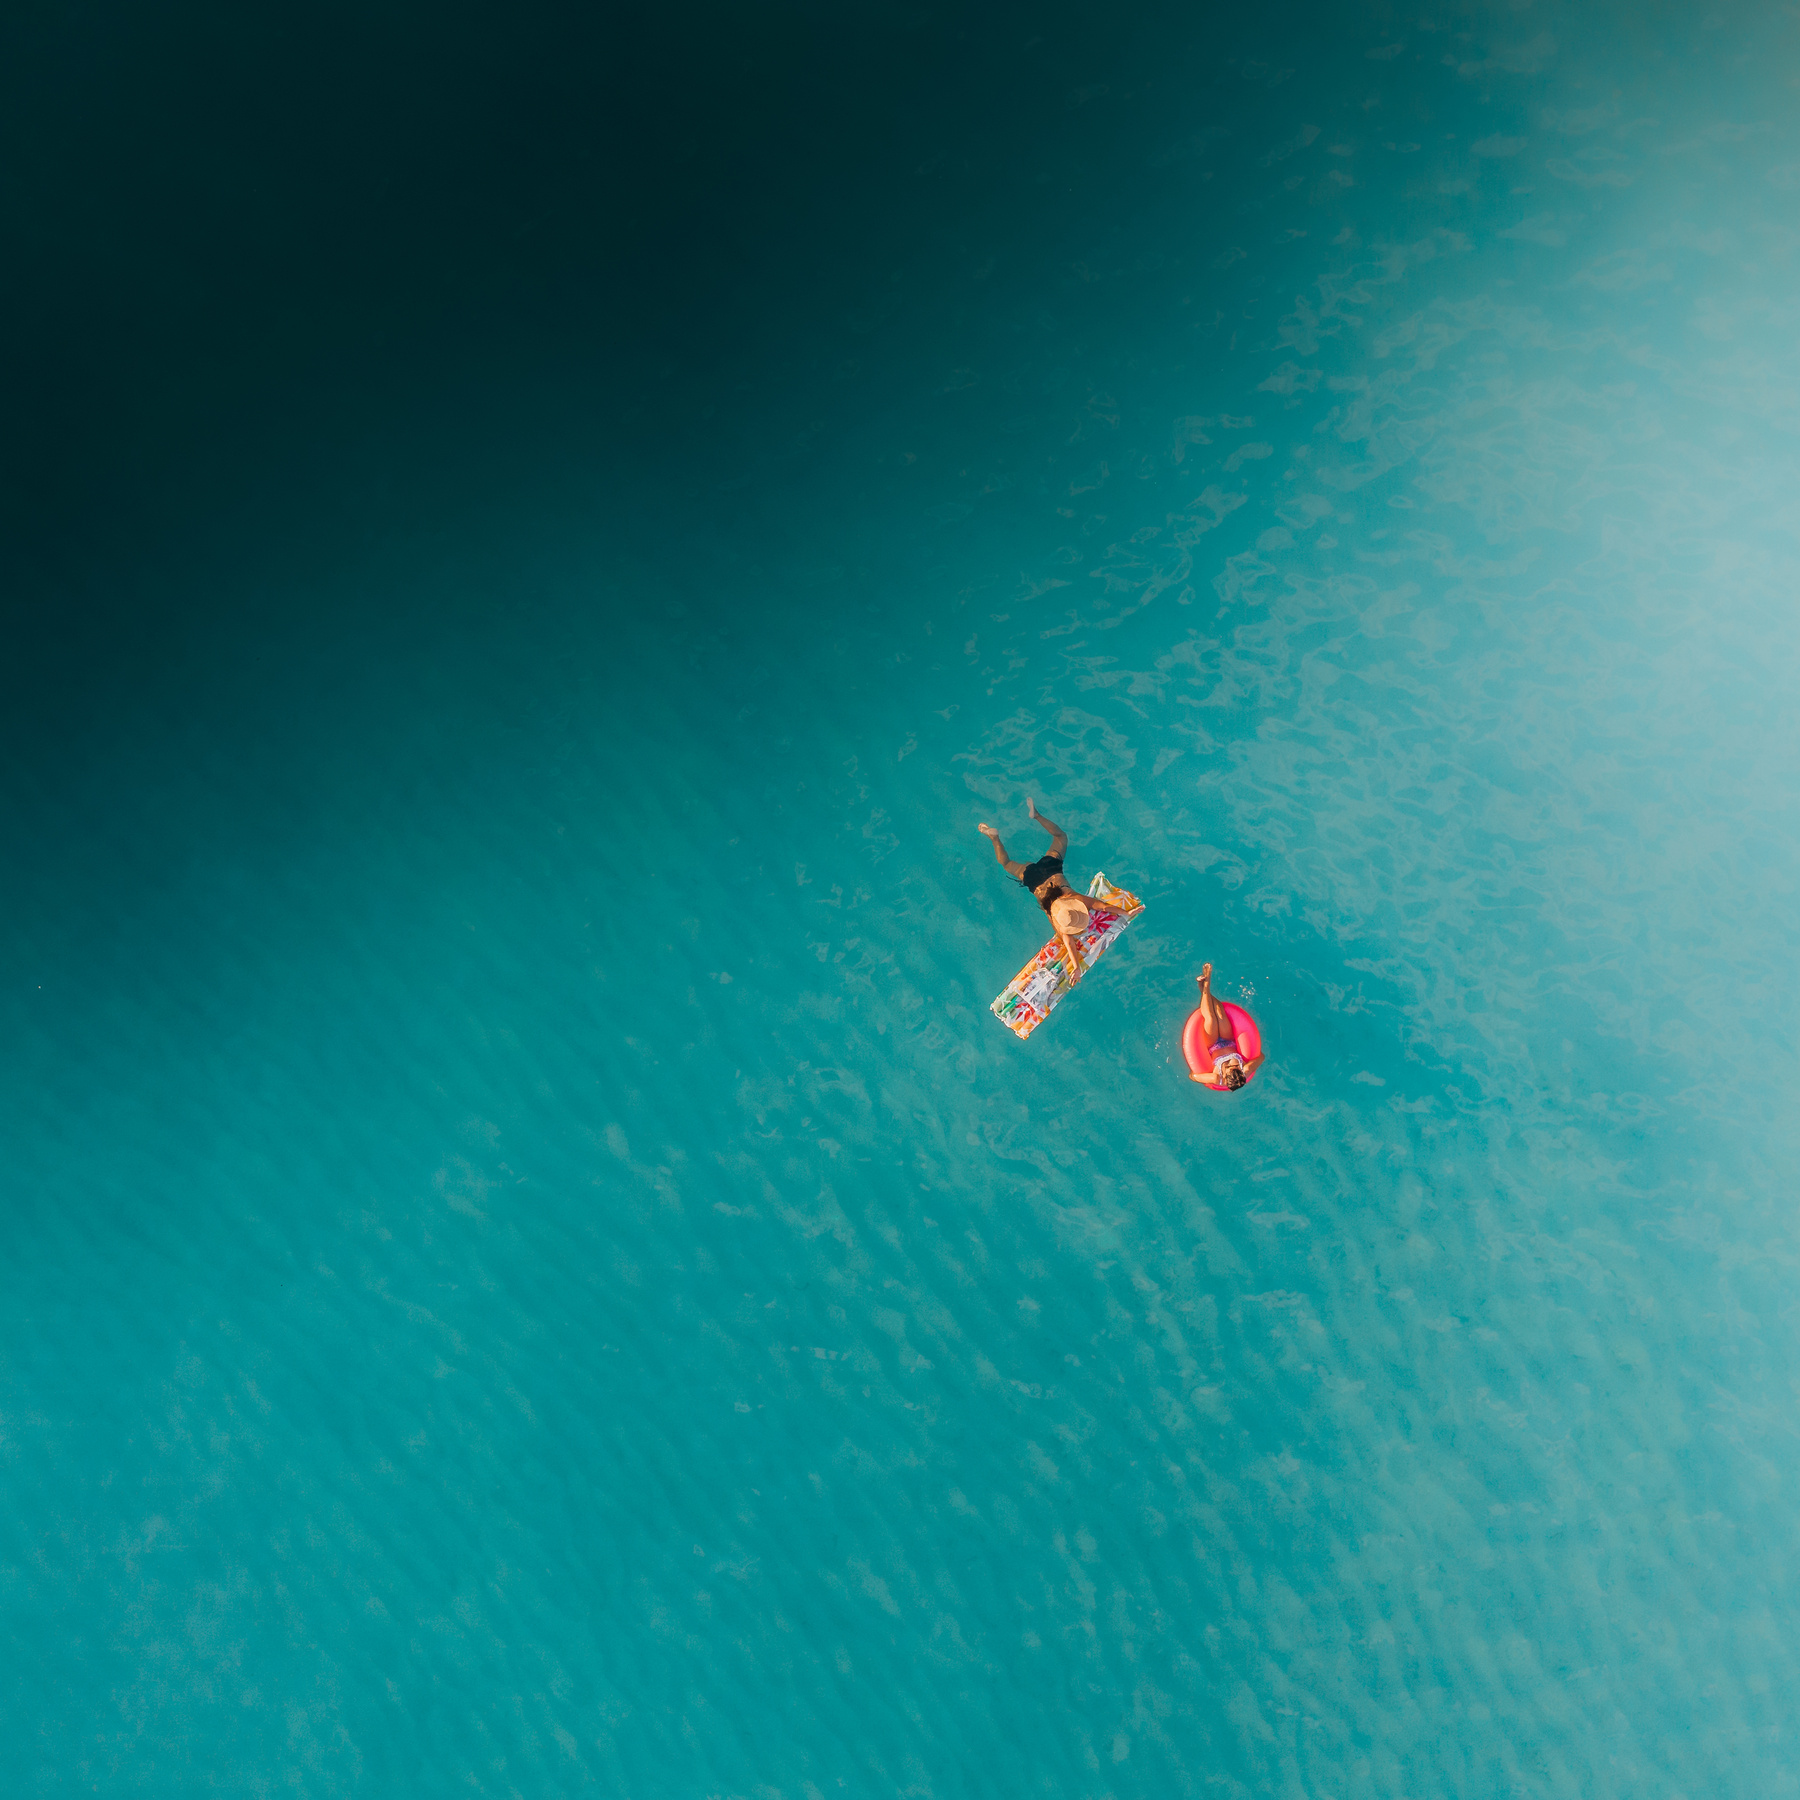 2 Person in Red and White Wetsuit Surfing on Blue Water